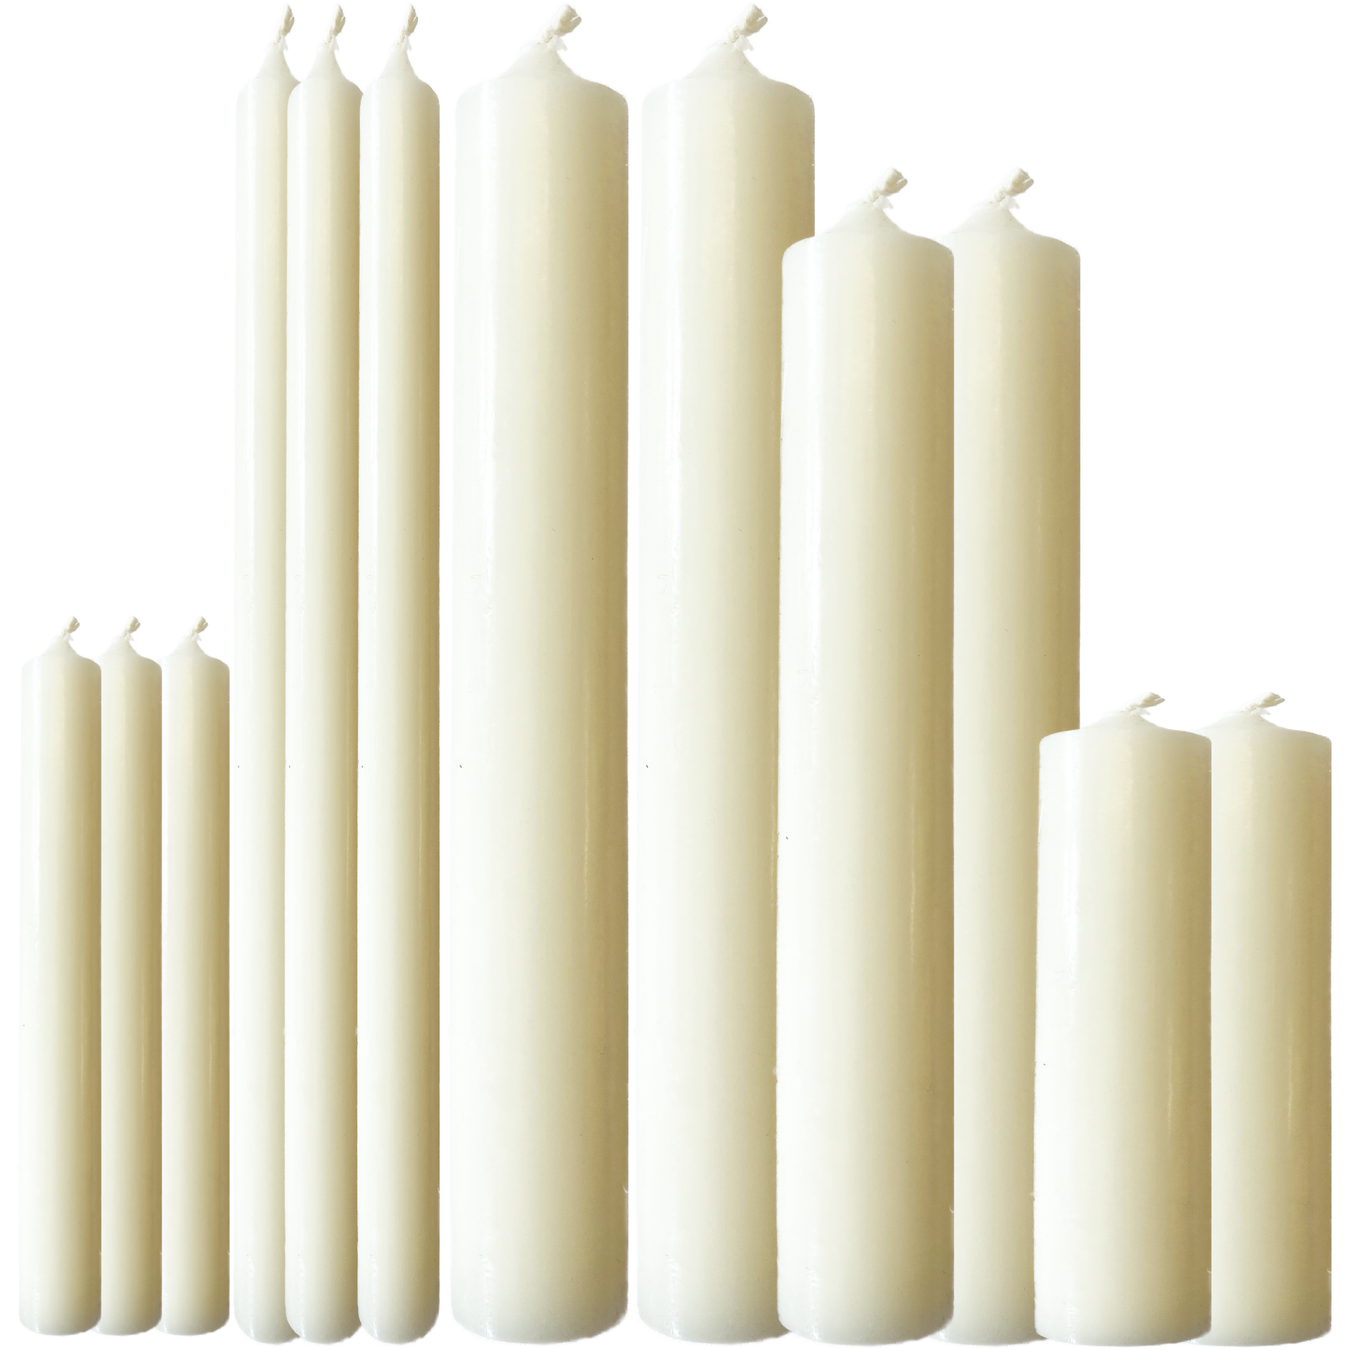 OTHER SIZES DINNER CANDLES